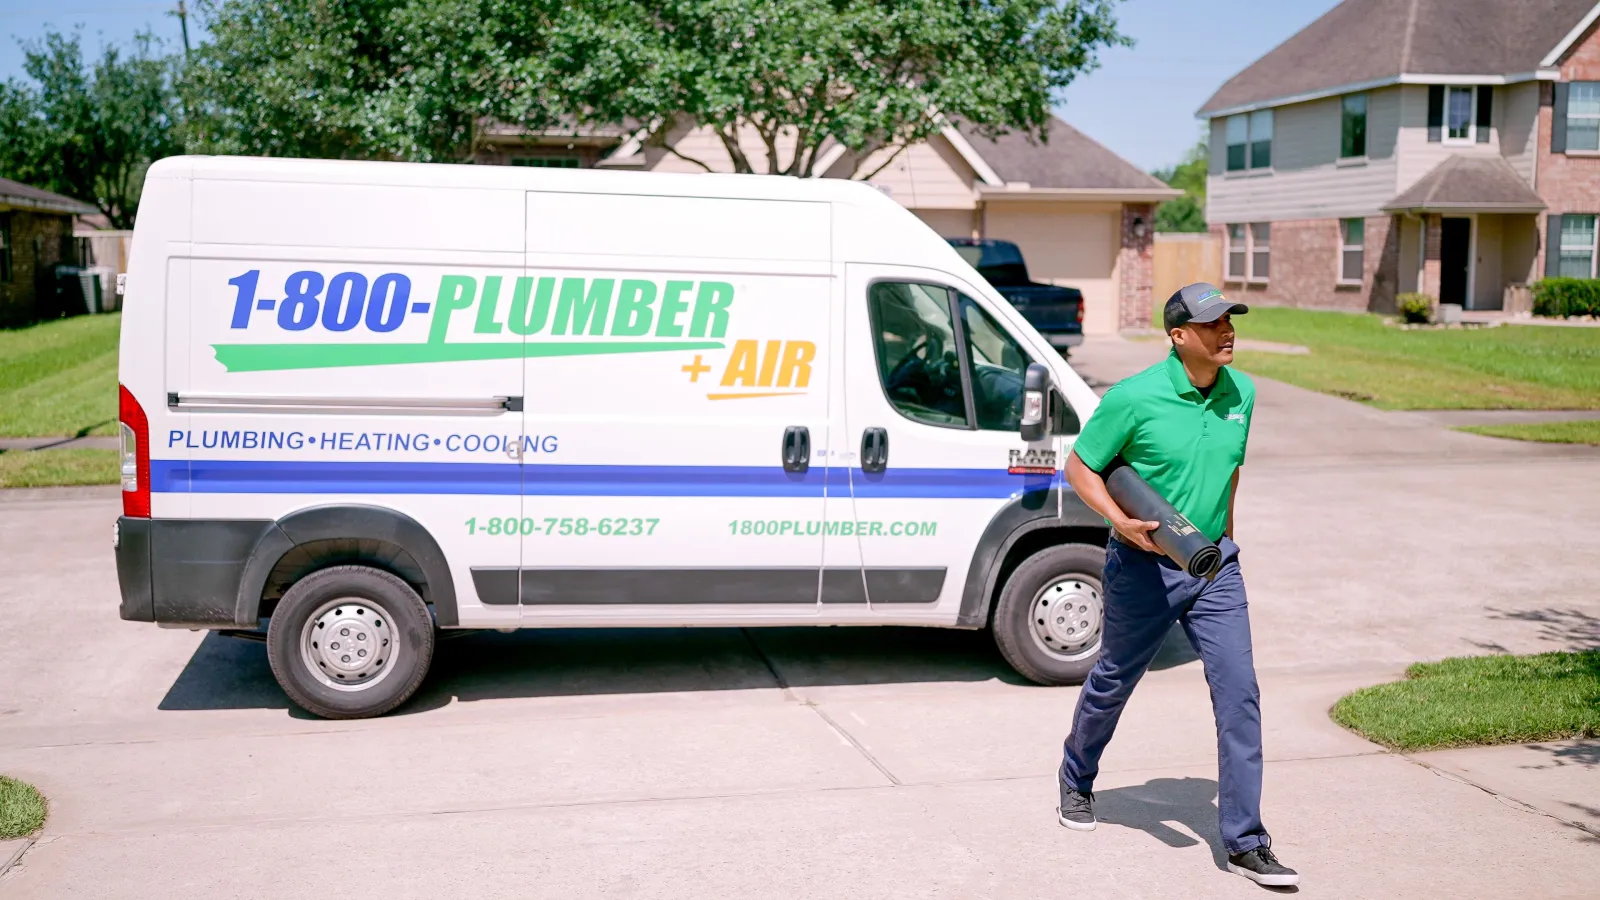 A 1-800-Plumber +Air of North County San Diego technician and a van